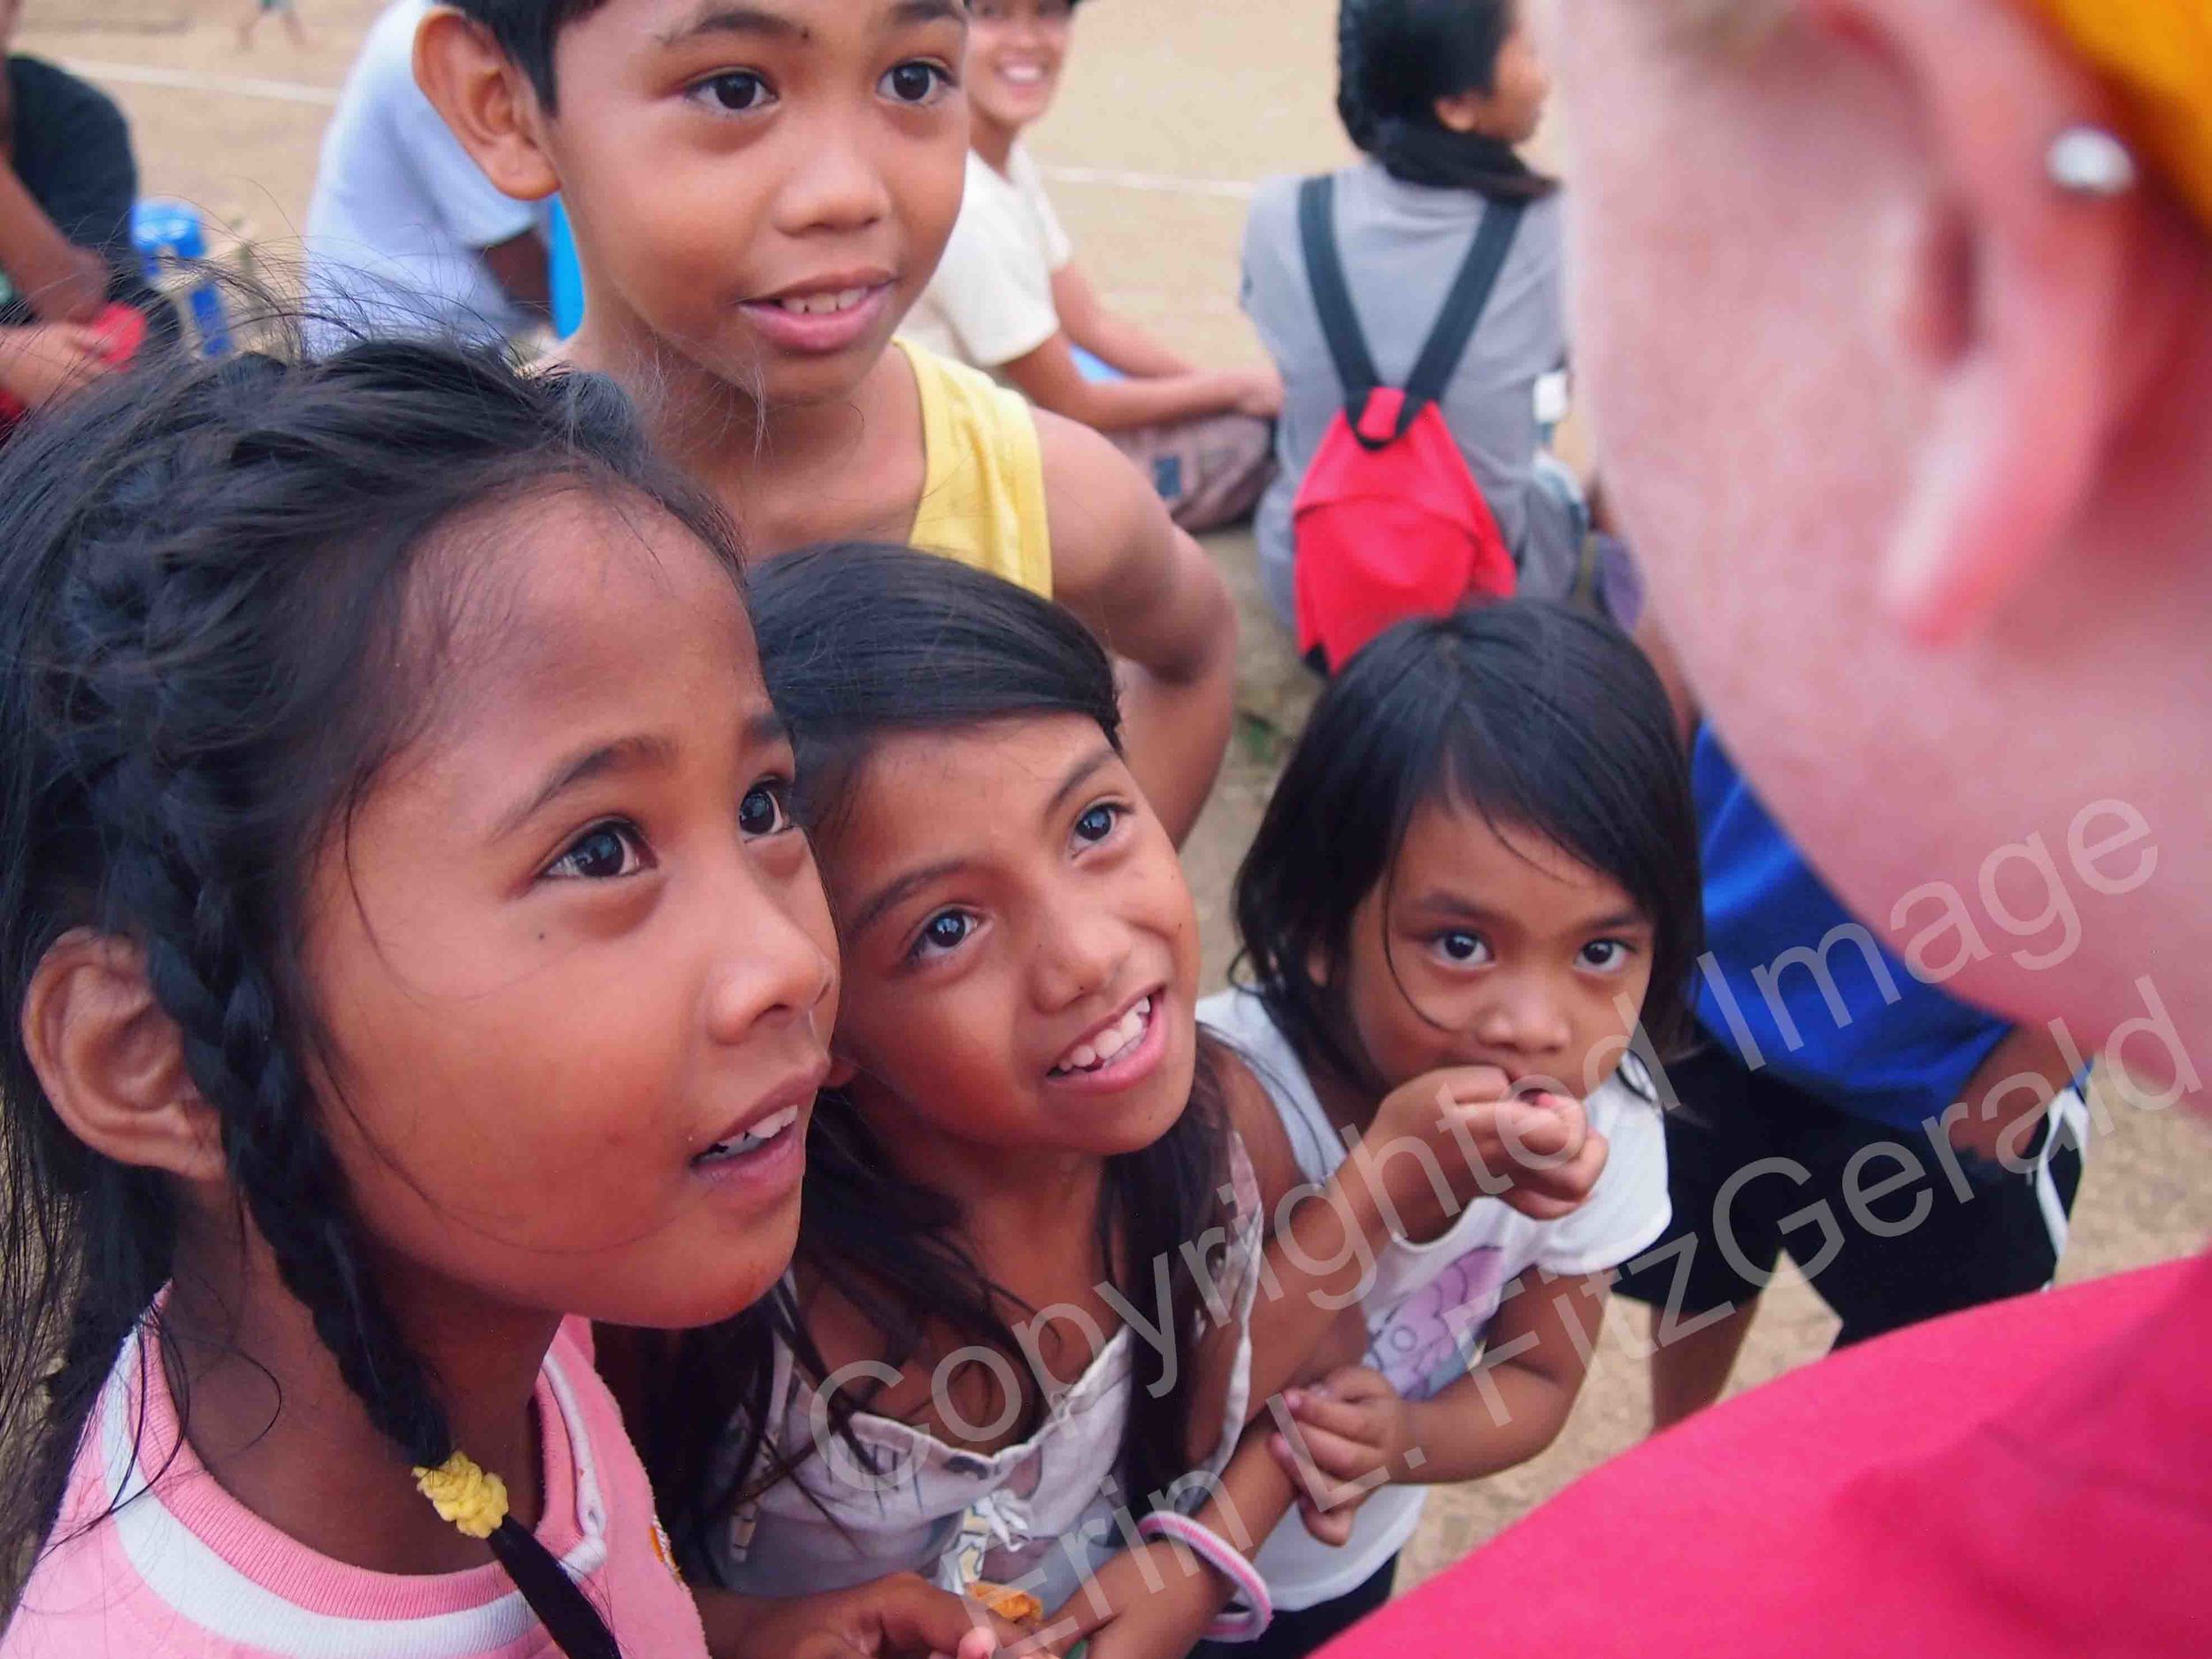   Children at a refugee center gather around a nurse visiting from the United States. The girls were brought to the center after their homes were damaged by Typhoon Haiyan in November 2013.  